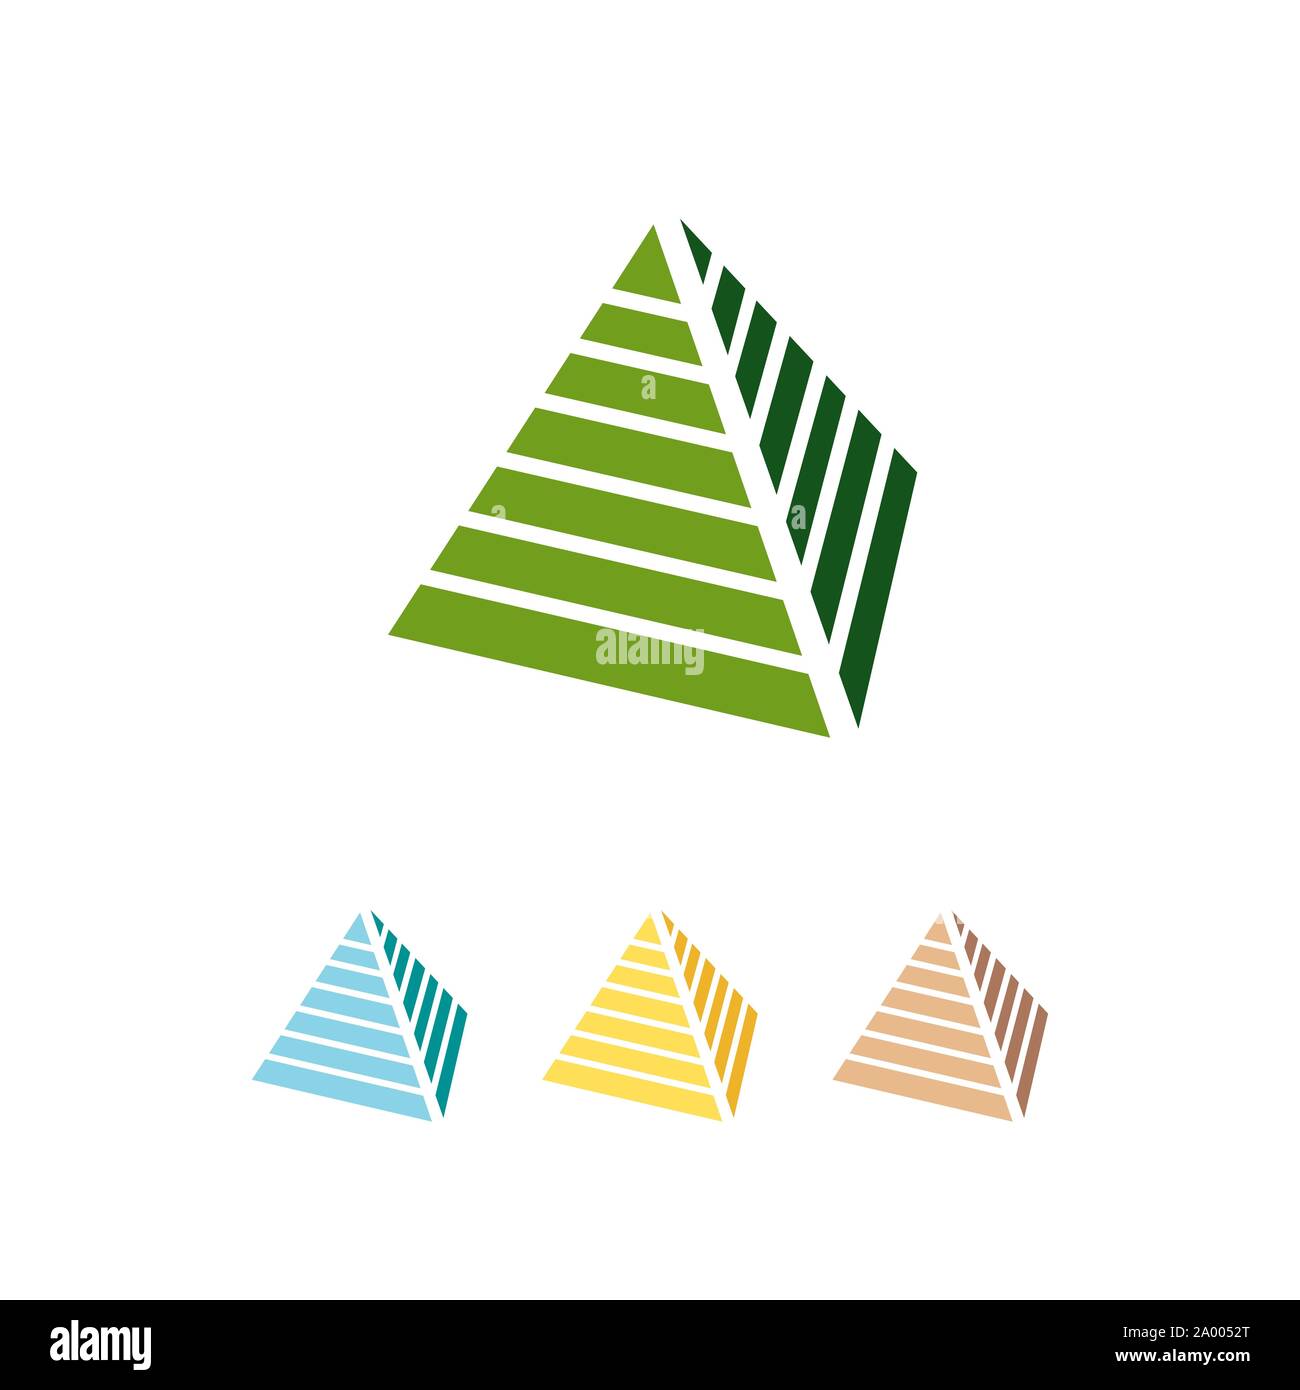 Abstract triangle 3D pyramid logo icon vector isolated on white background Stock Vector